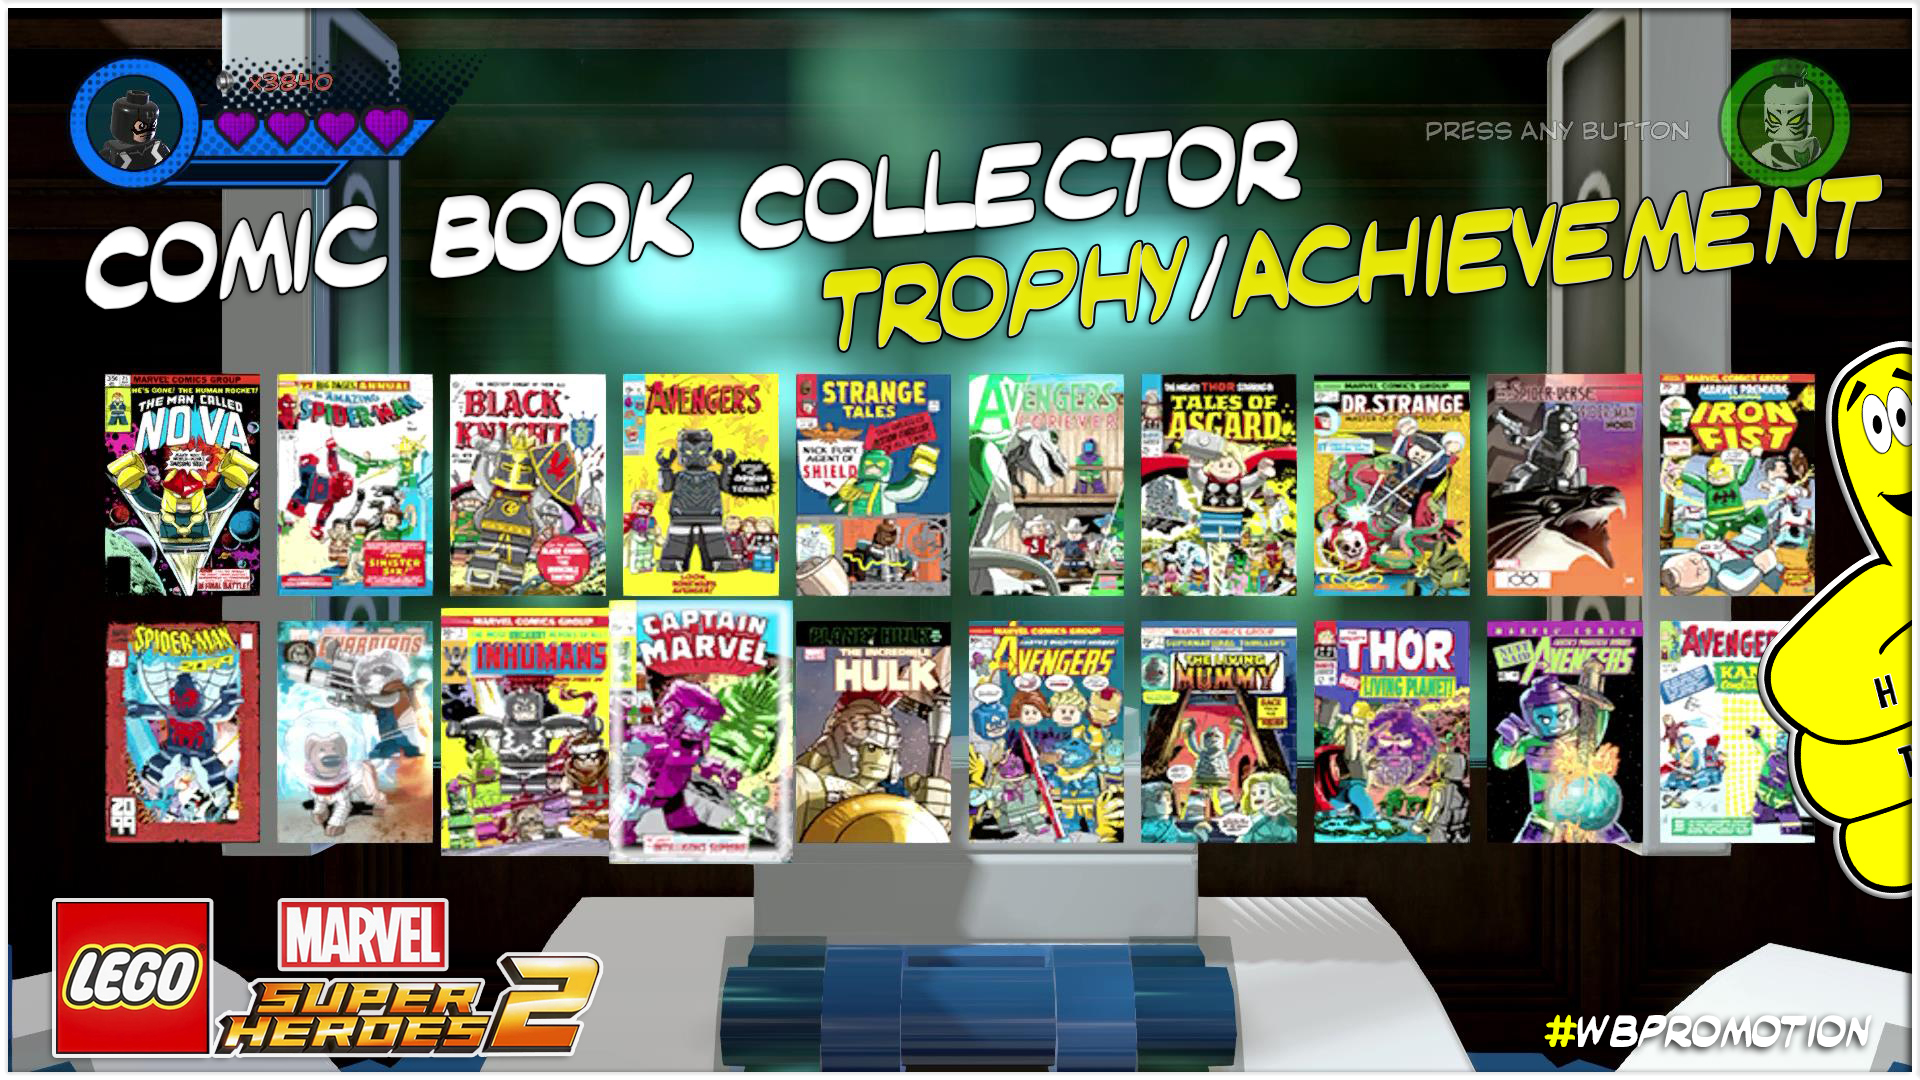 ComicBookCollectorTrophy Thumb